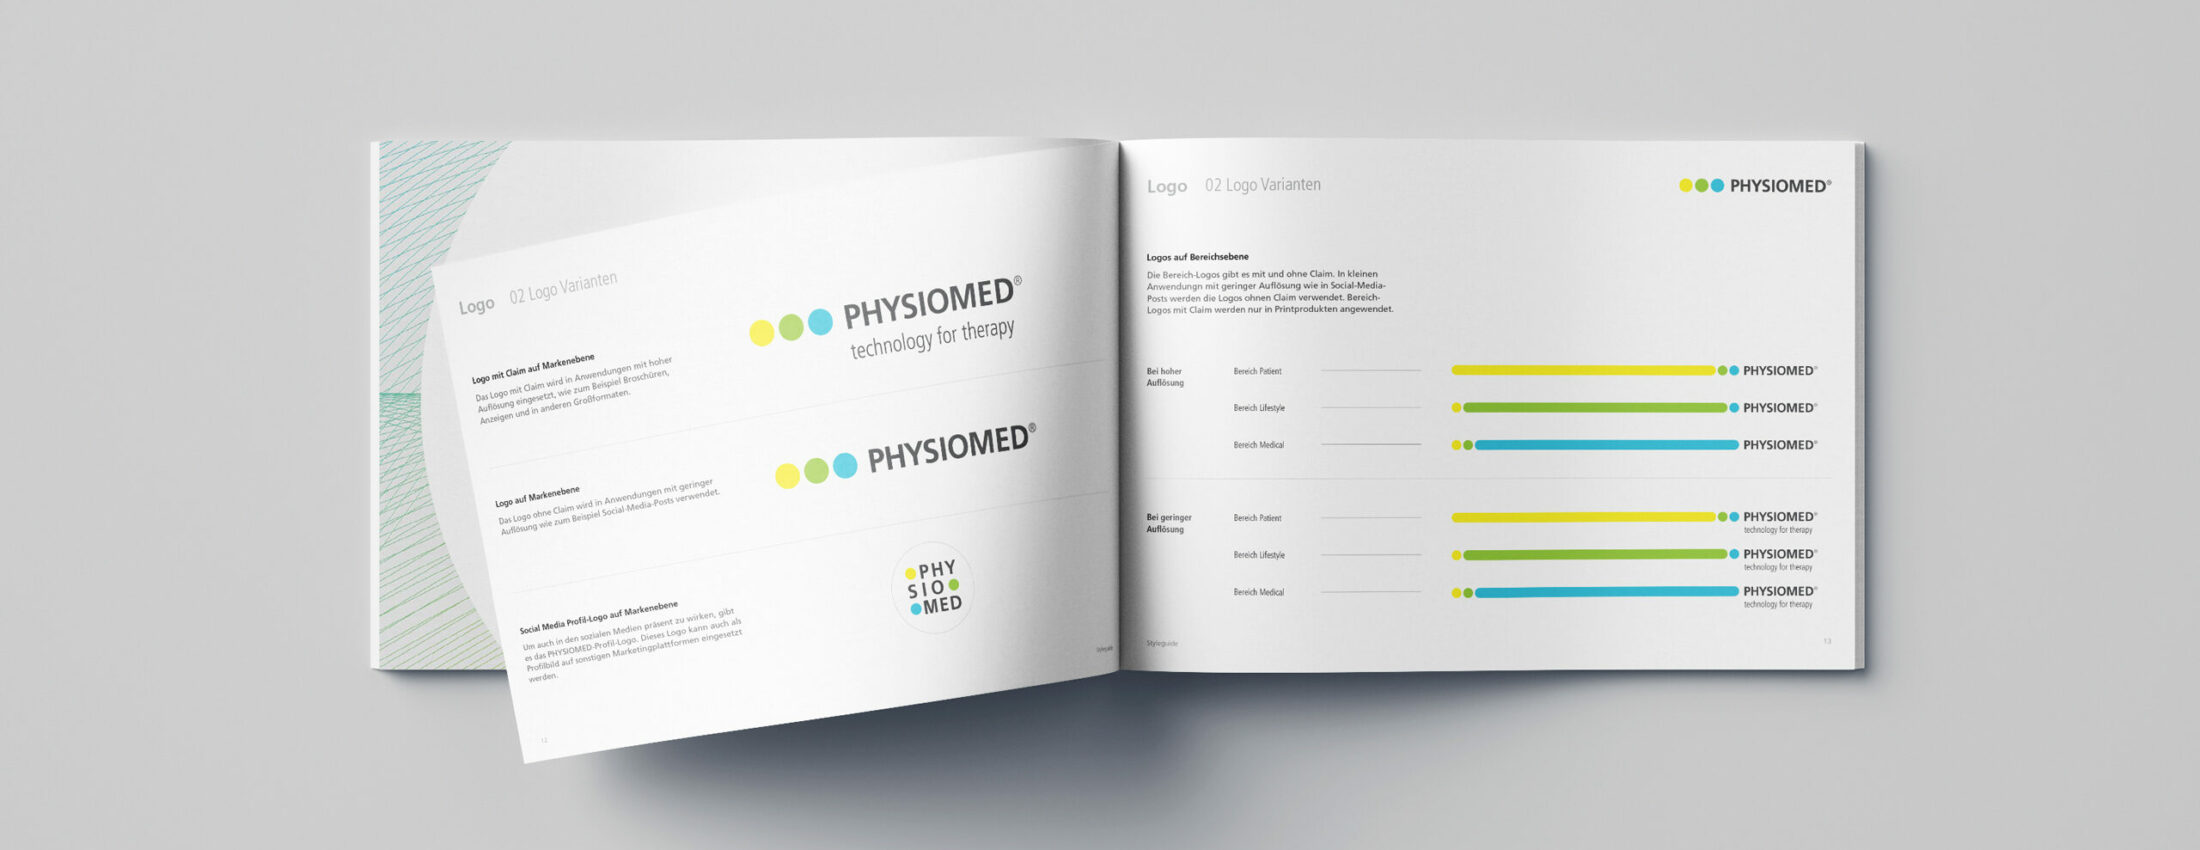 PHYSIOMED_Styleguide_Mockup_3